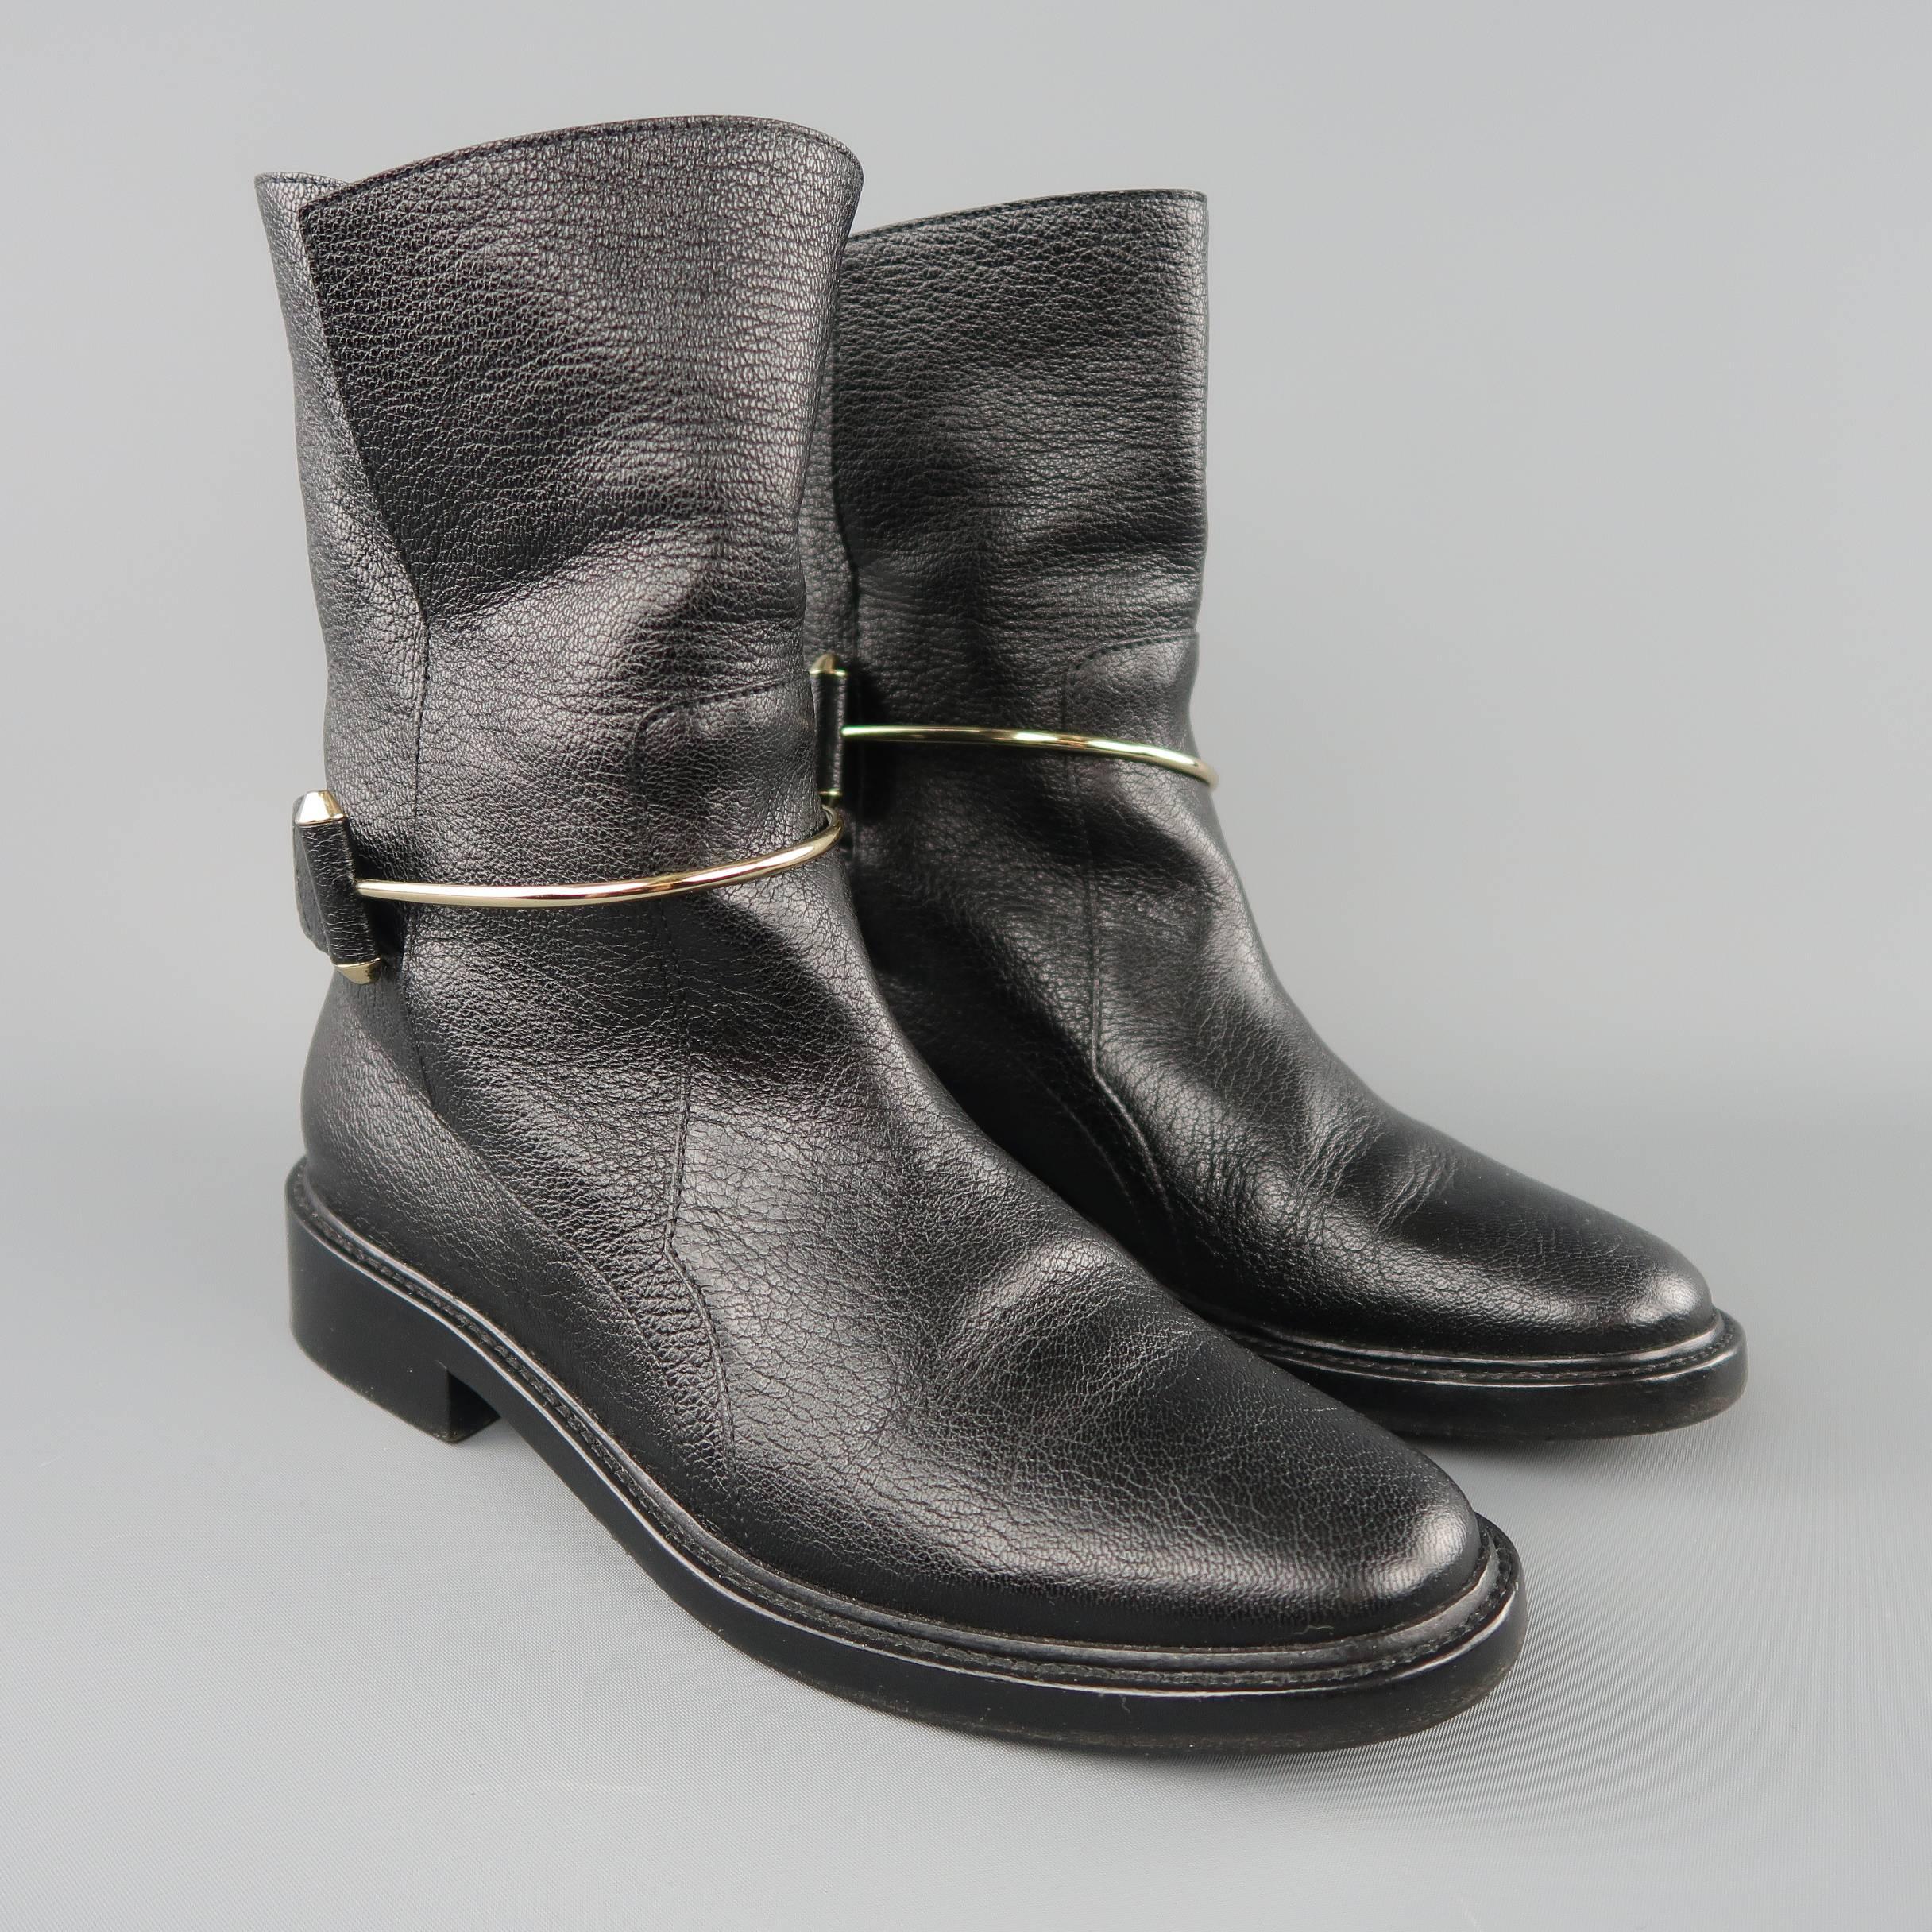 BALENCIAGA by Alexander Wang biker boots come in pebbled leather with a rounded point toe, heeled sole, and gold tone metal bar strap detail. Made in Italy.
 
Excellent Pre-Owned Condition.
Marked: IT 37
 
Measurements:
 
Heel: 1 in.
Length: 8